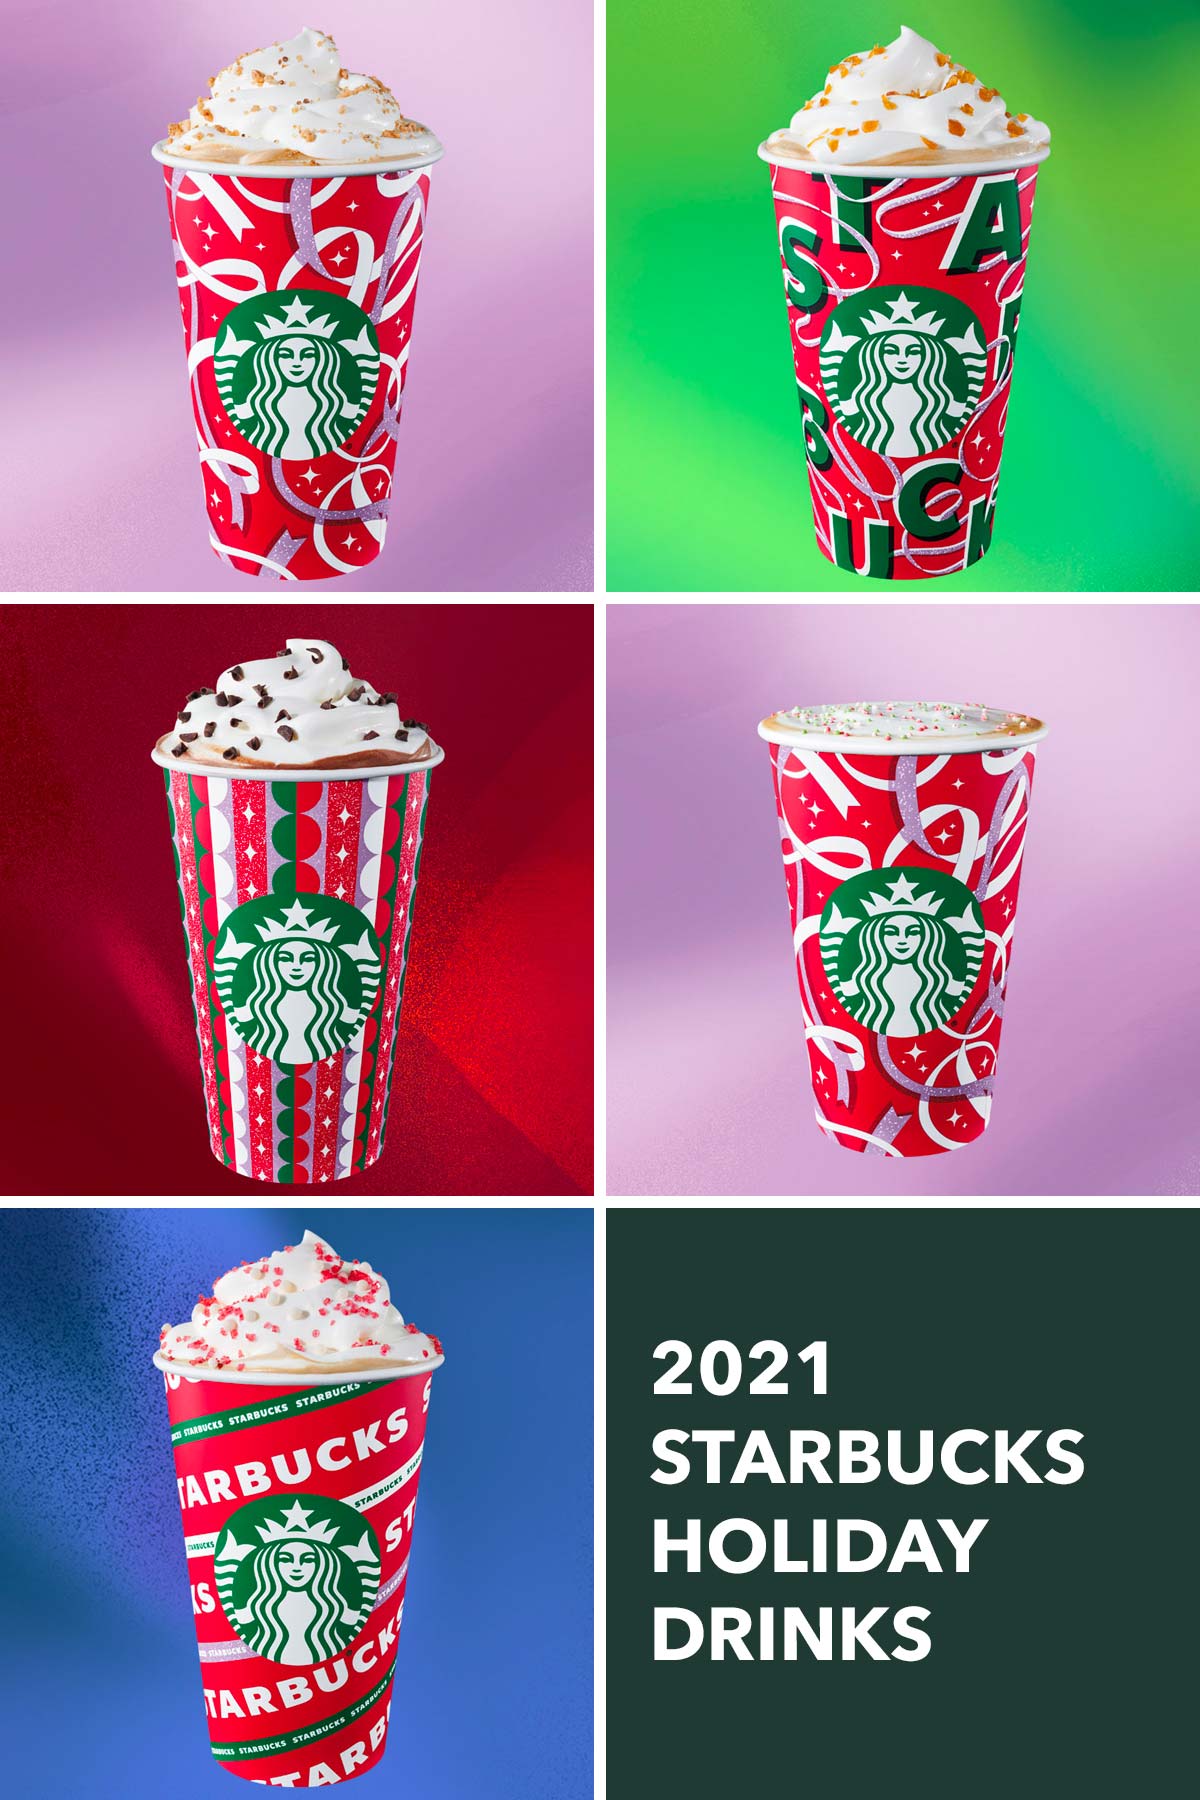 Six photo grid showing five Starbucks holiday drinks.